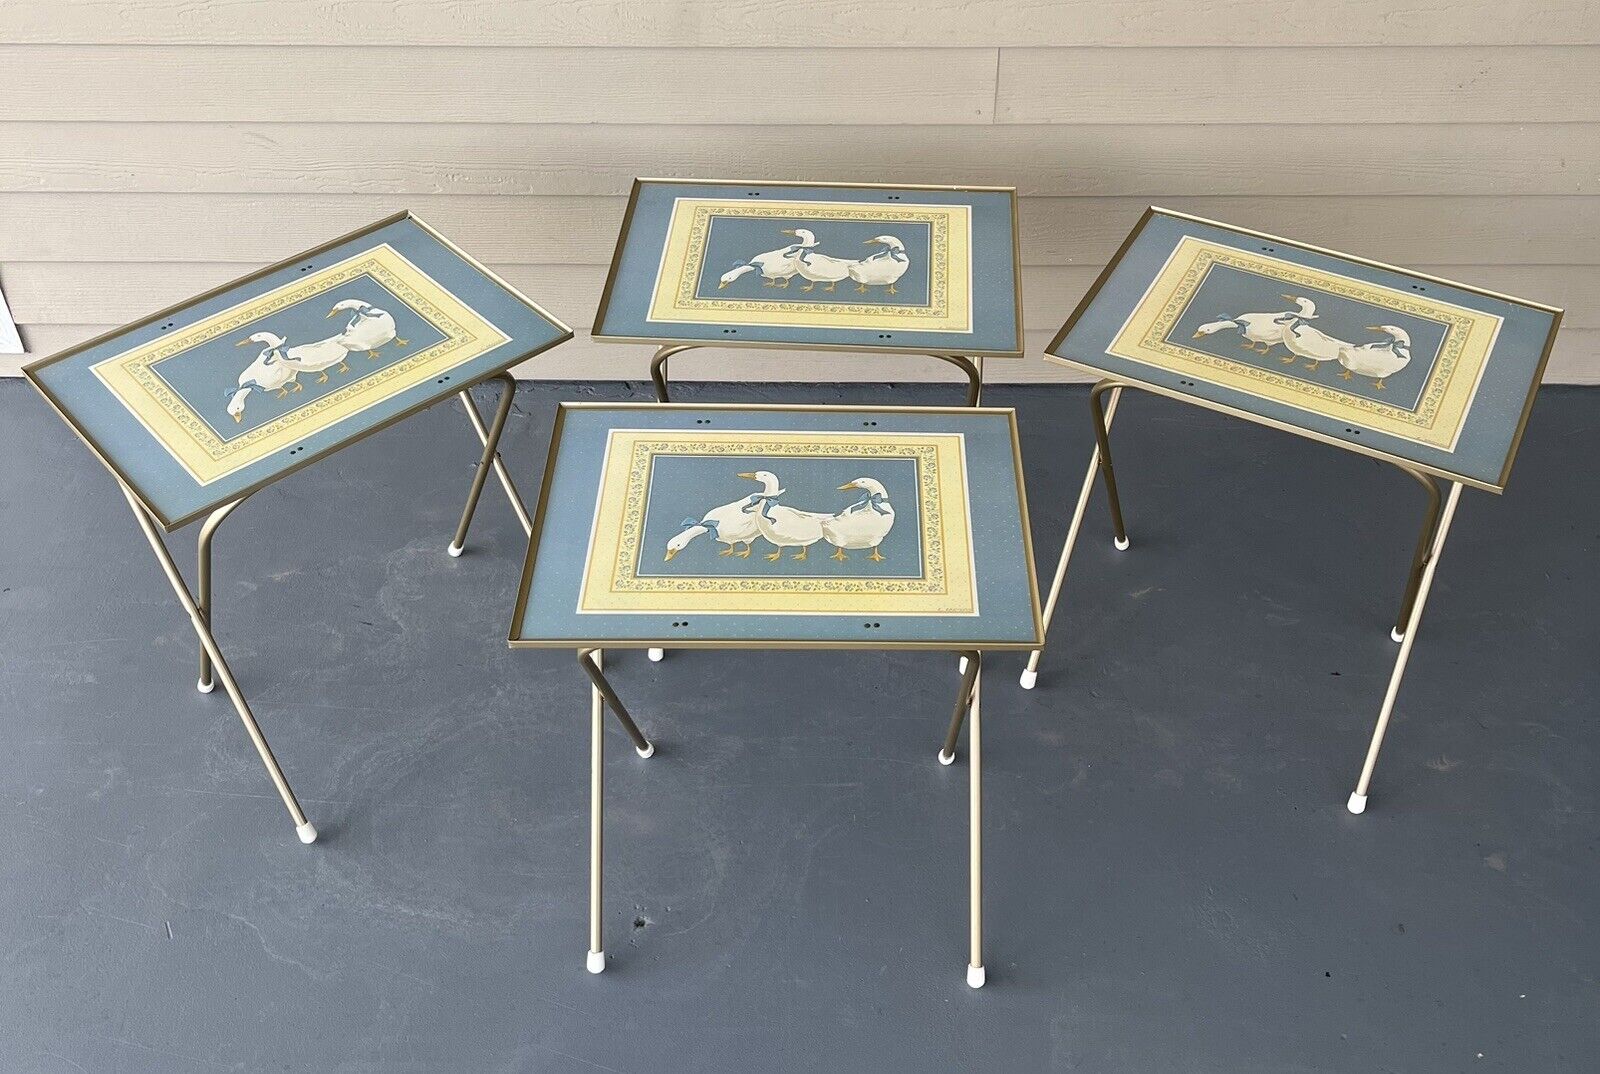 VTG 4 TV Trays w/Stand Folding Table E. Brownd Blue Ribbon Geese Goose Cork Back